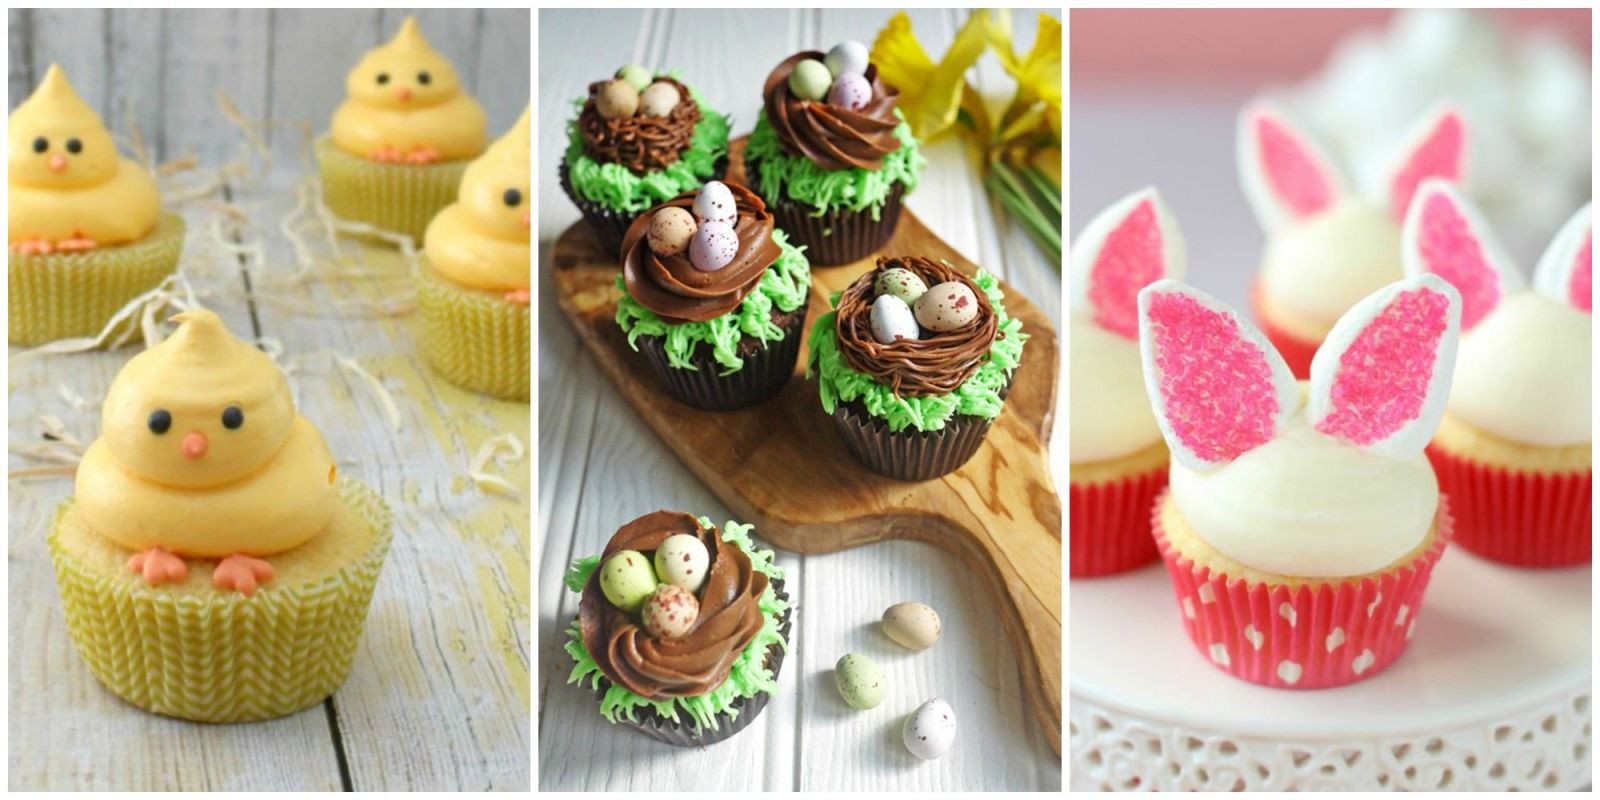 Easy Easter Cupcakes Decorating Ideas
 21 Cute Easter Cupcakes Easy Ideas for Easter Cupcake Recipes